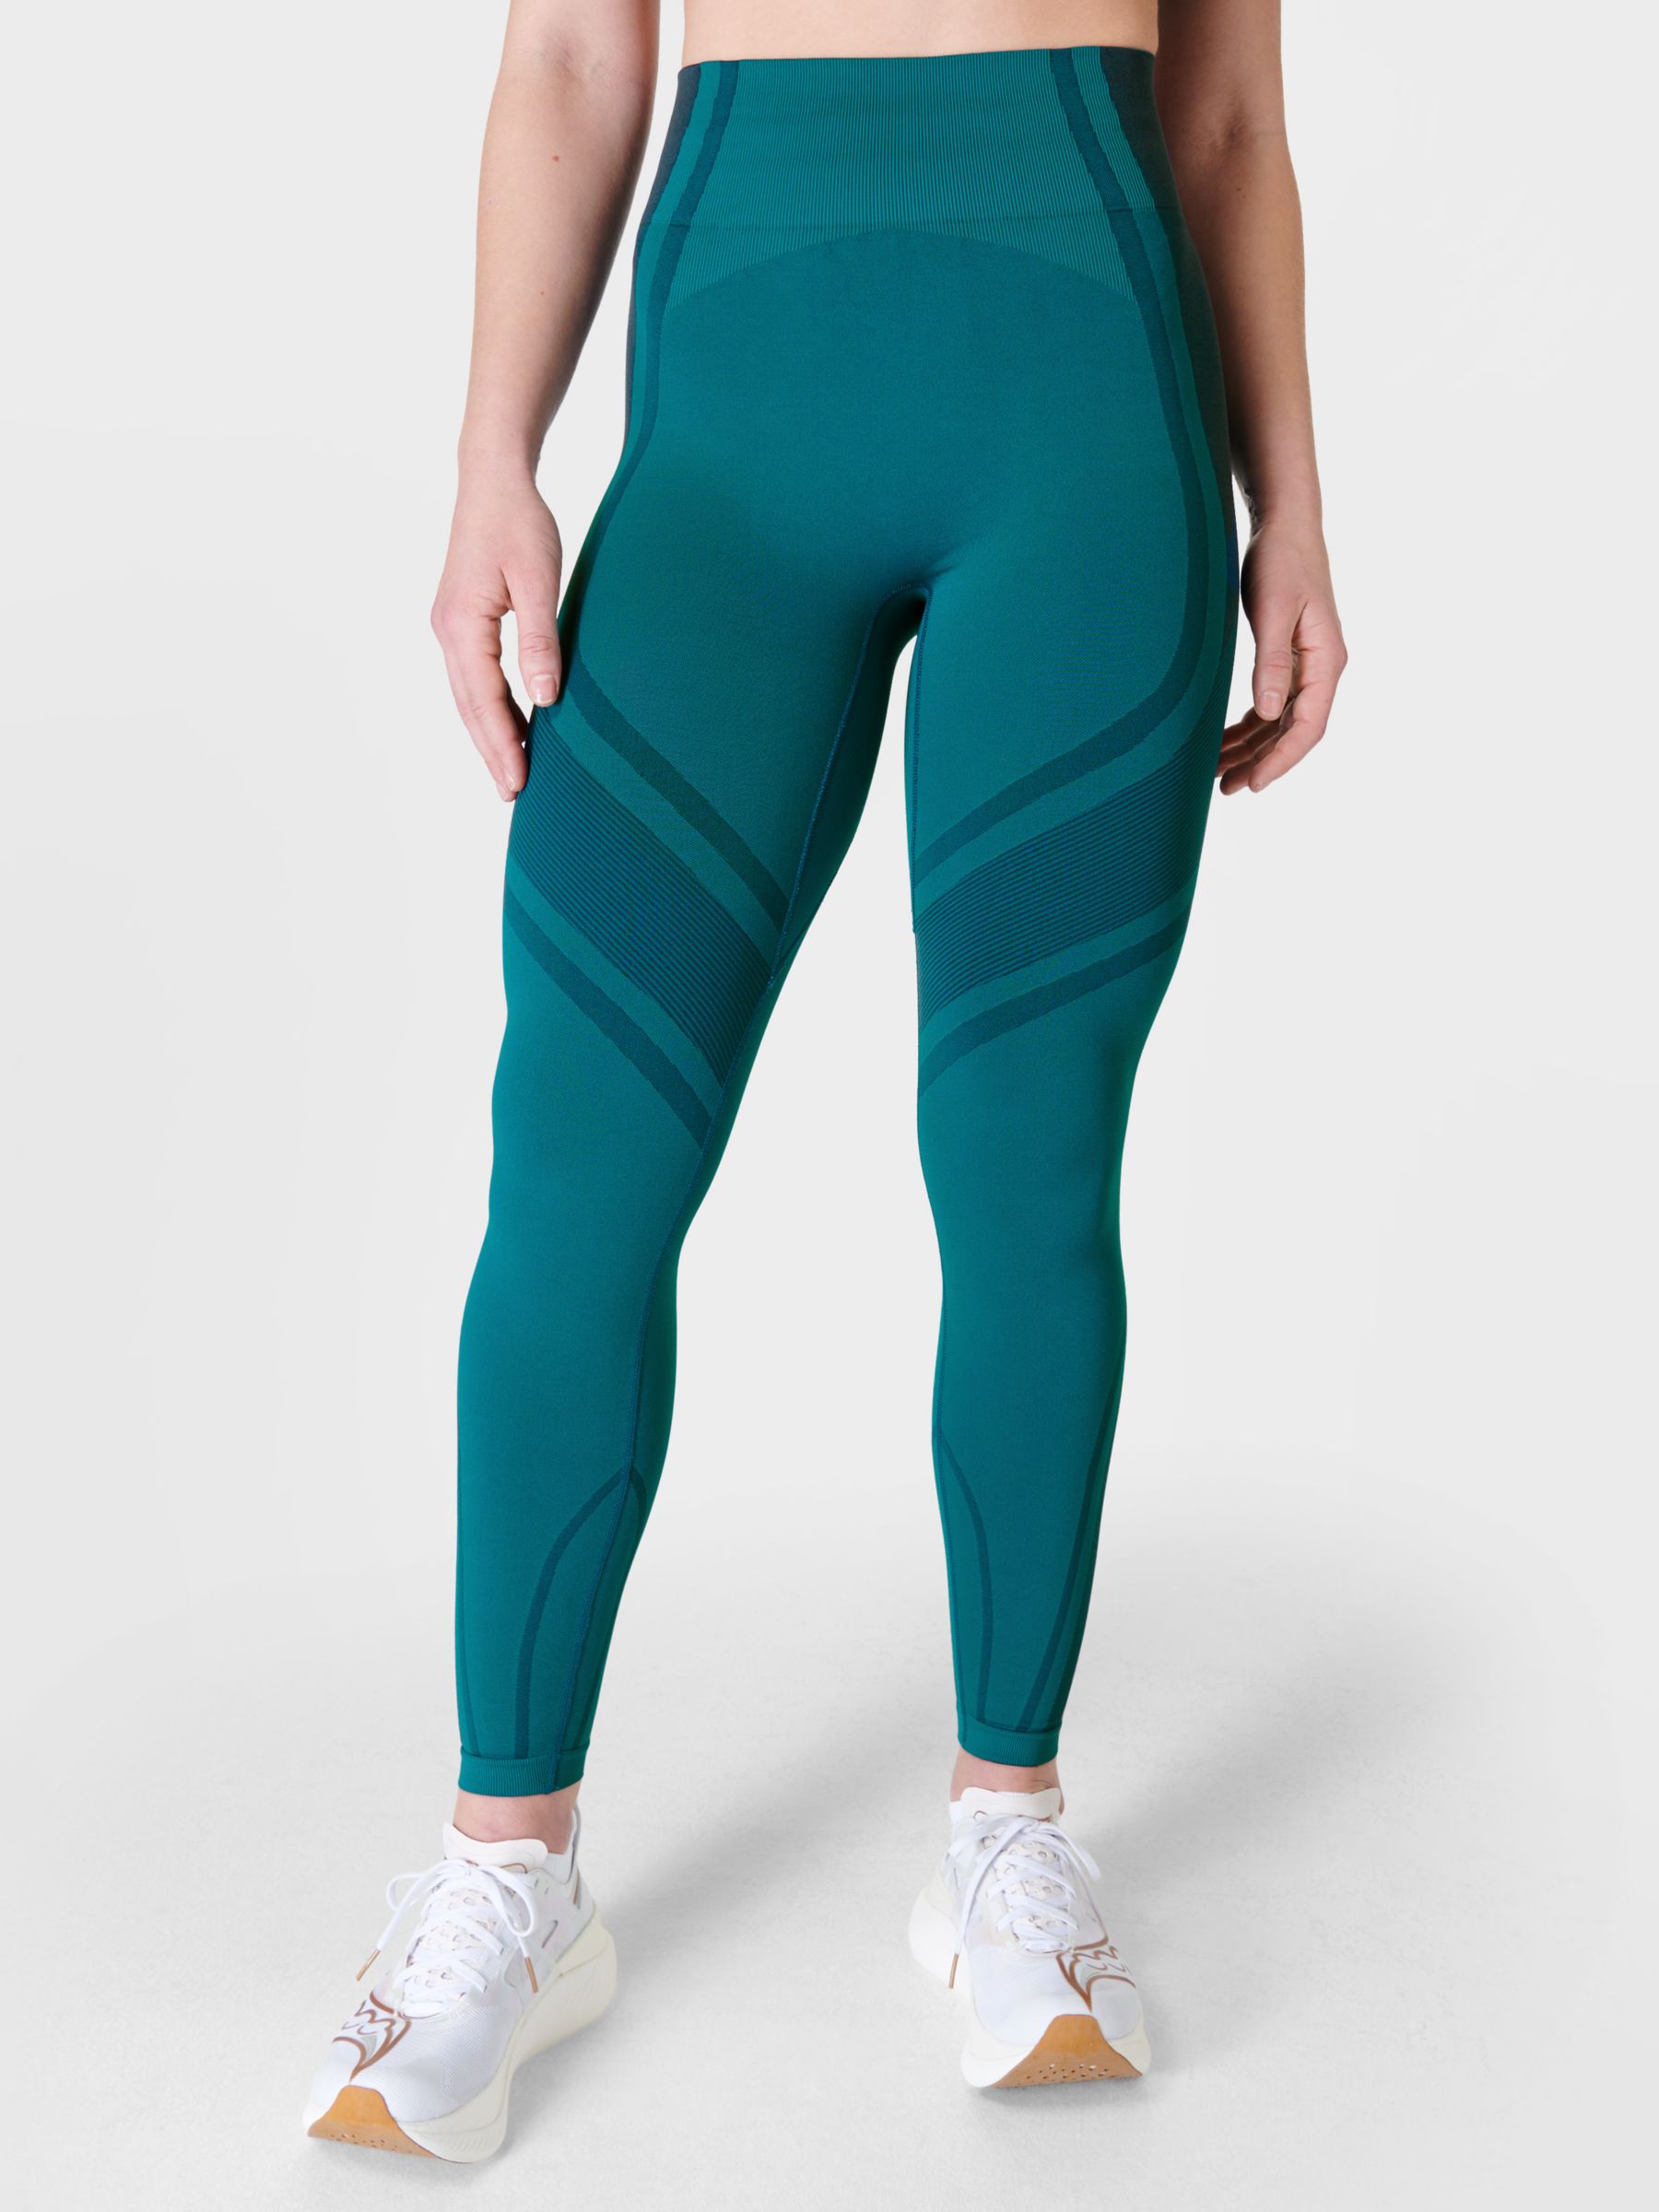 Betty's Journey: Tone Your Body Easily By Wearing Seamless